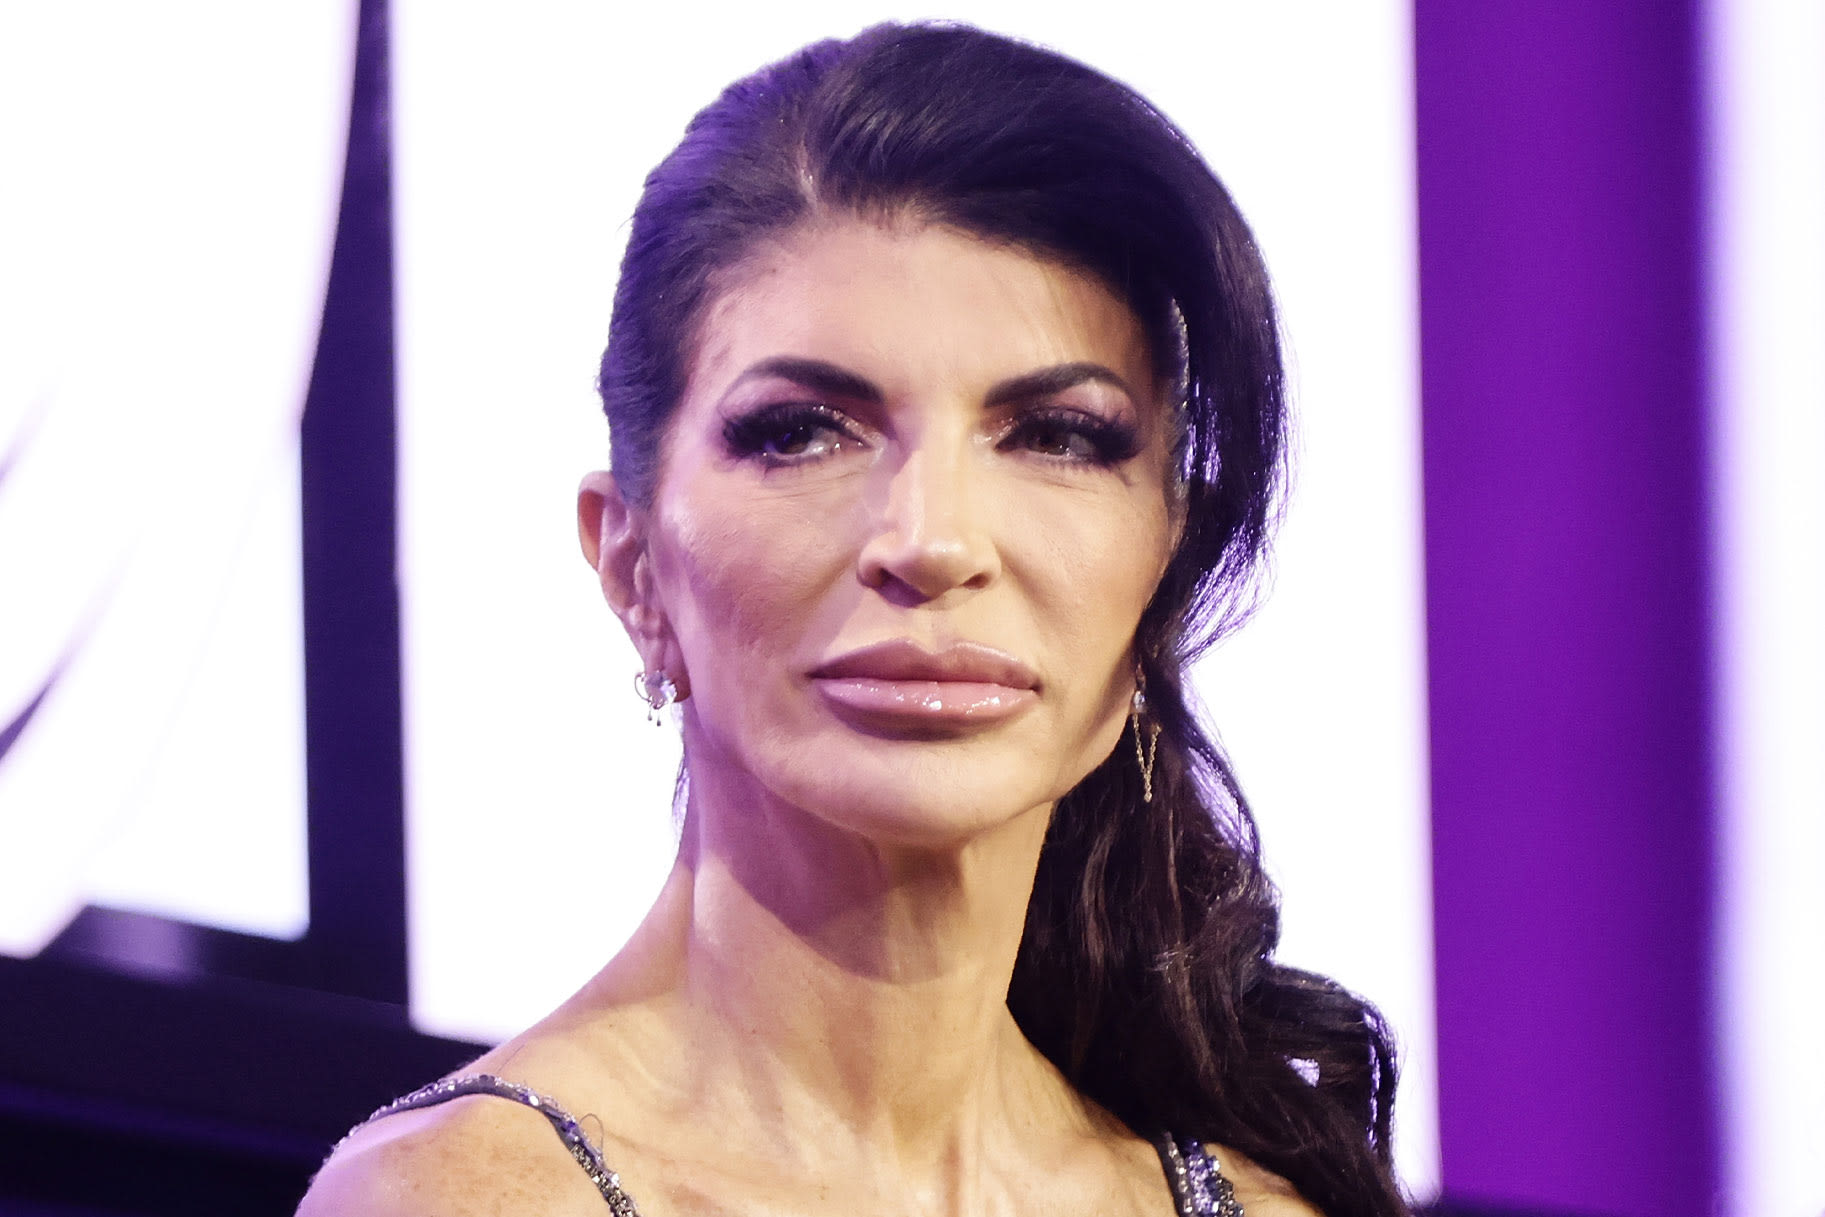 Teresa Giudice Opens Up on How She Was Able To "Forgive" After Going to Prison (VIDEO)